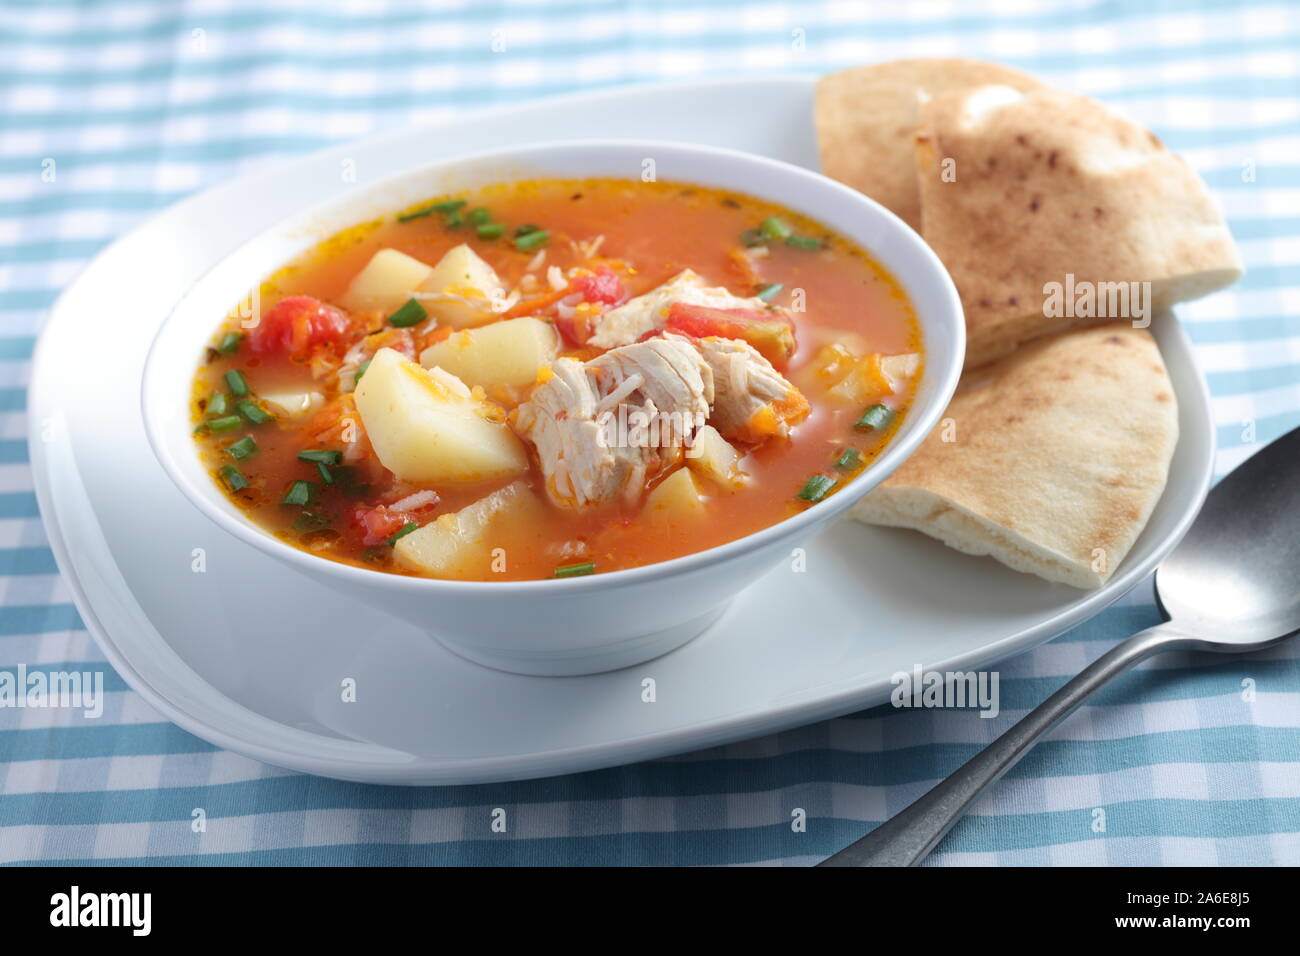 Turkish style tomato soup with chicken and vegetables Stock Photo